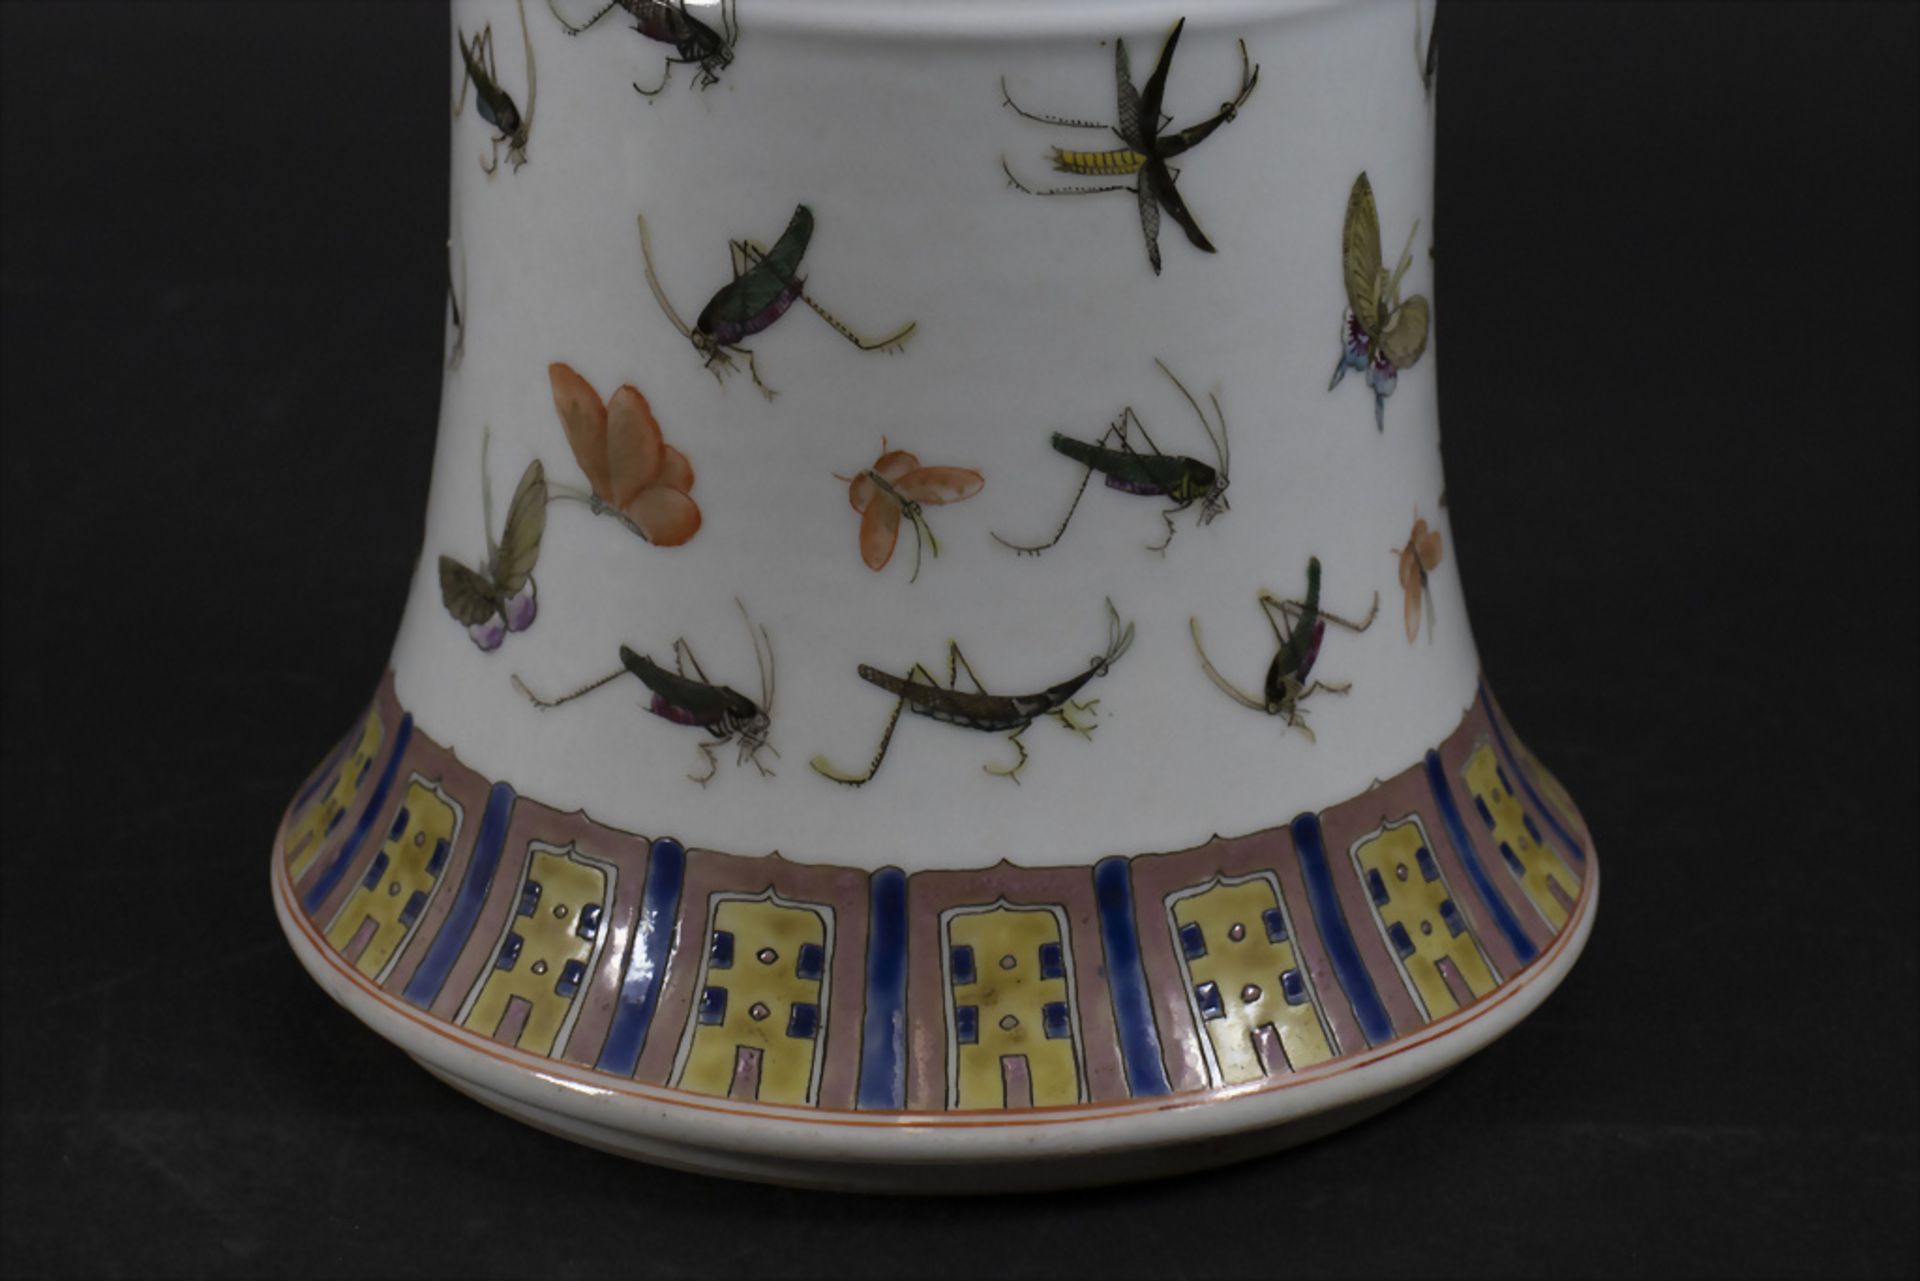 Porzellanvase mit Insekten in Gu Form / A GU shaped porcelain vase wih insects, China, 19./20. Jh. - Image 3 of 9